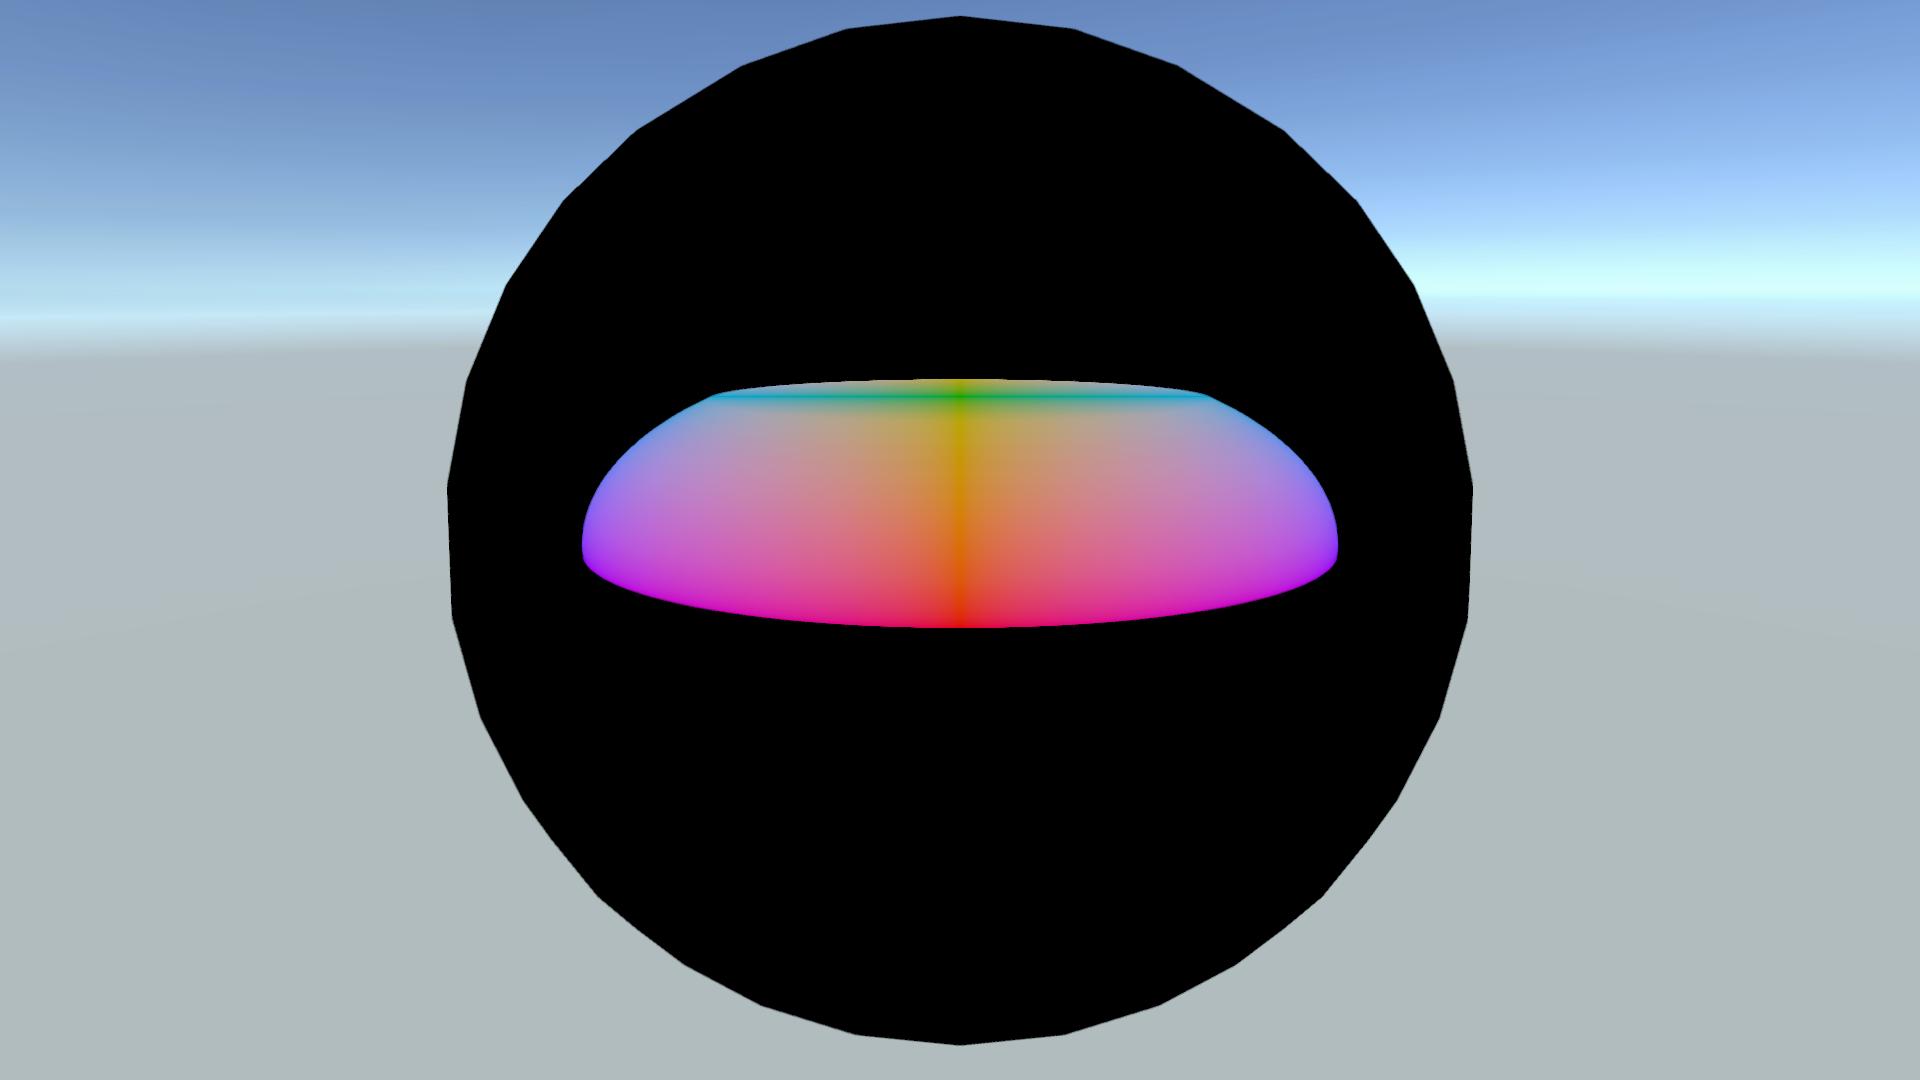 Capped ellipsoid on a 50 scale sphere object with parameters \(s_x = 15\), \(s_y = 10\), \(s_z = 20\), distance scale = 20 and cap heights 0 and 0.75